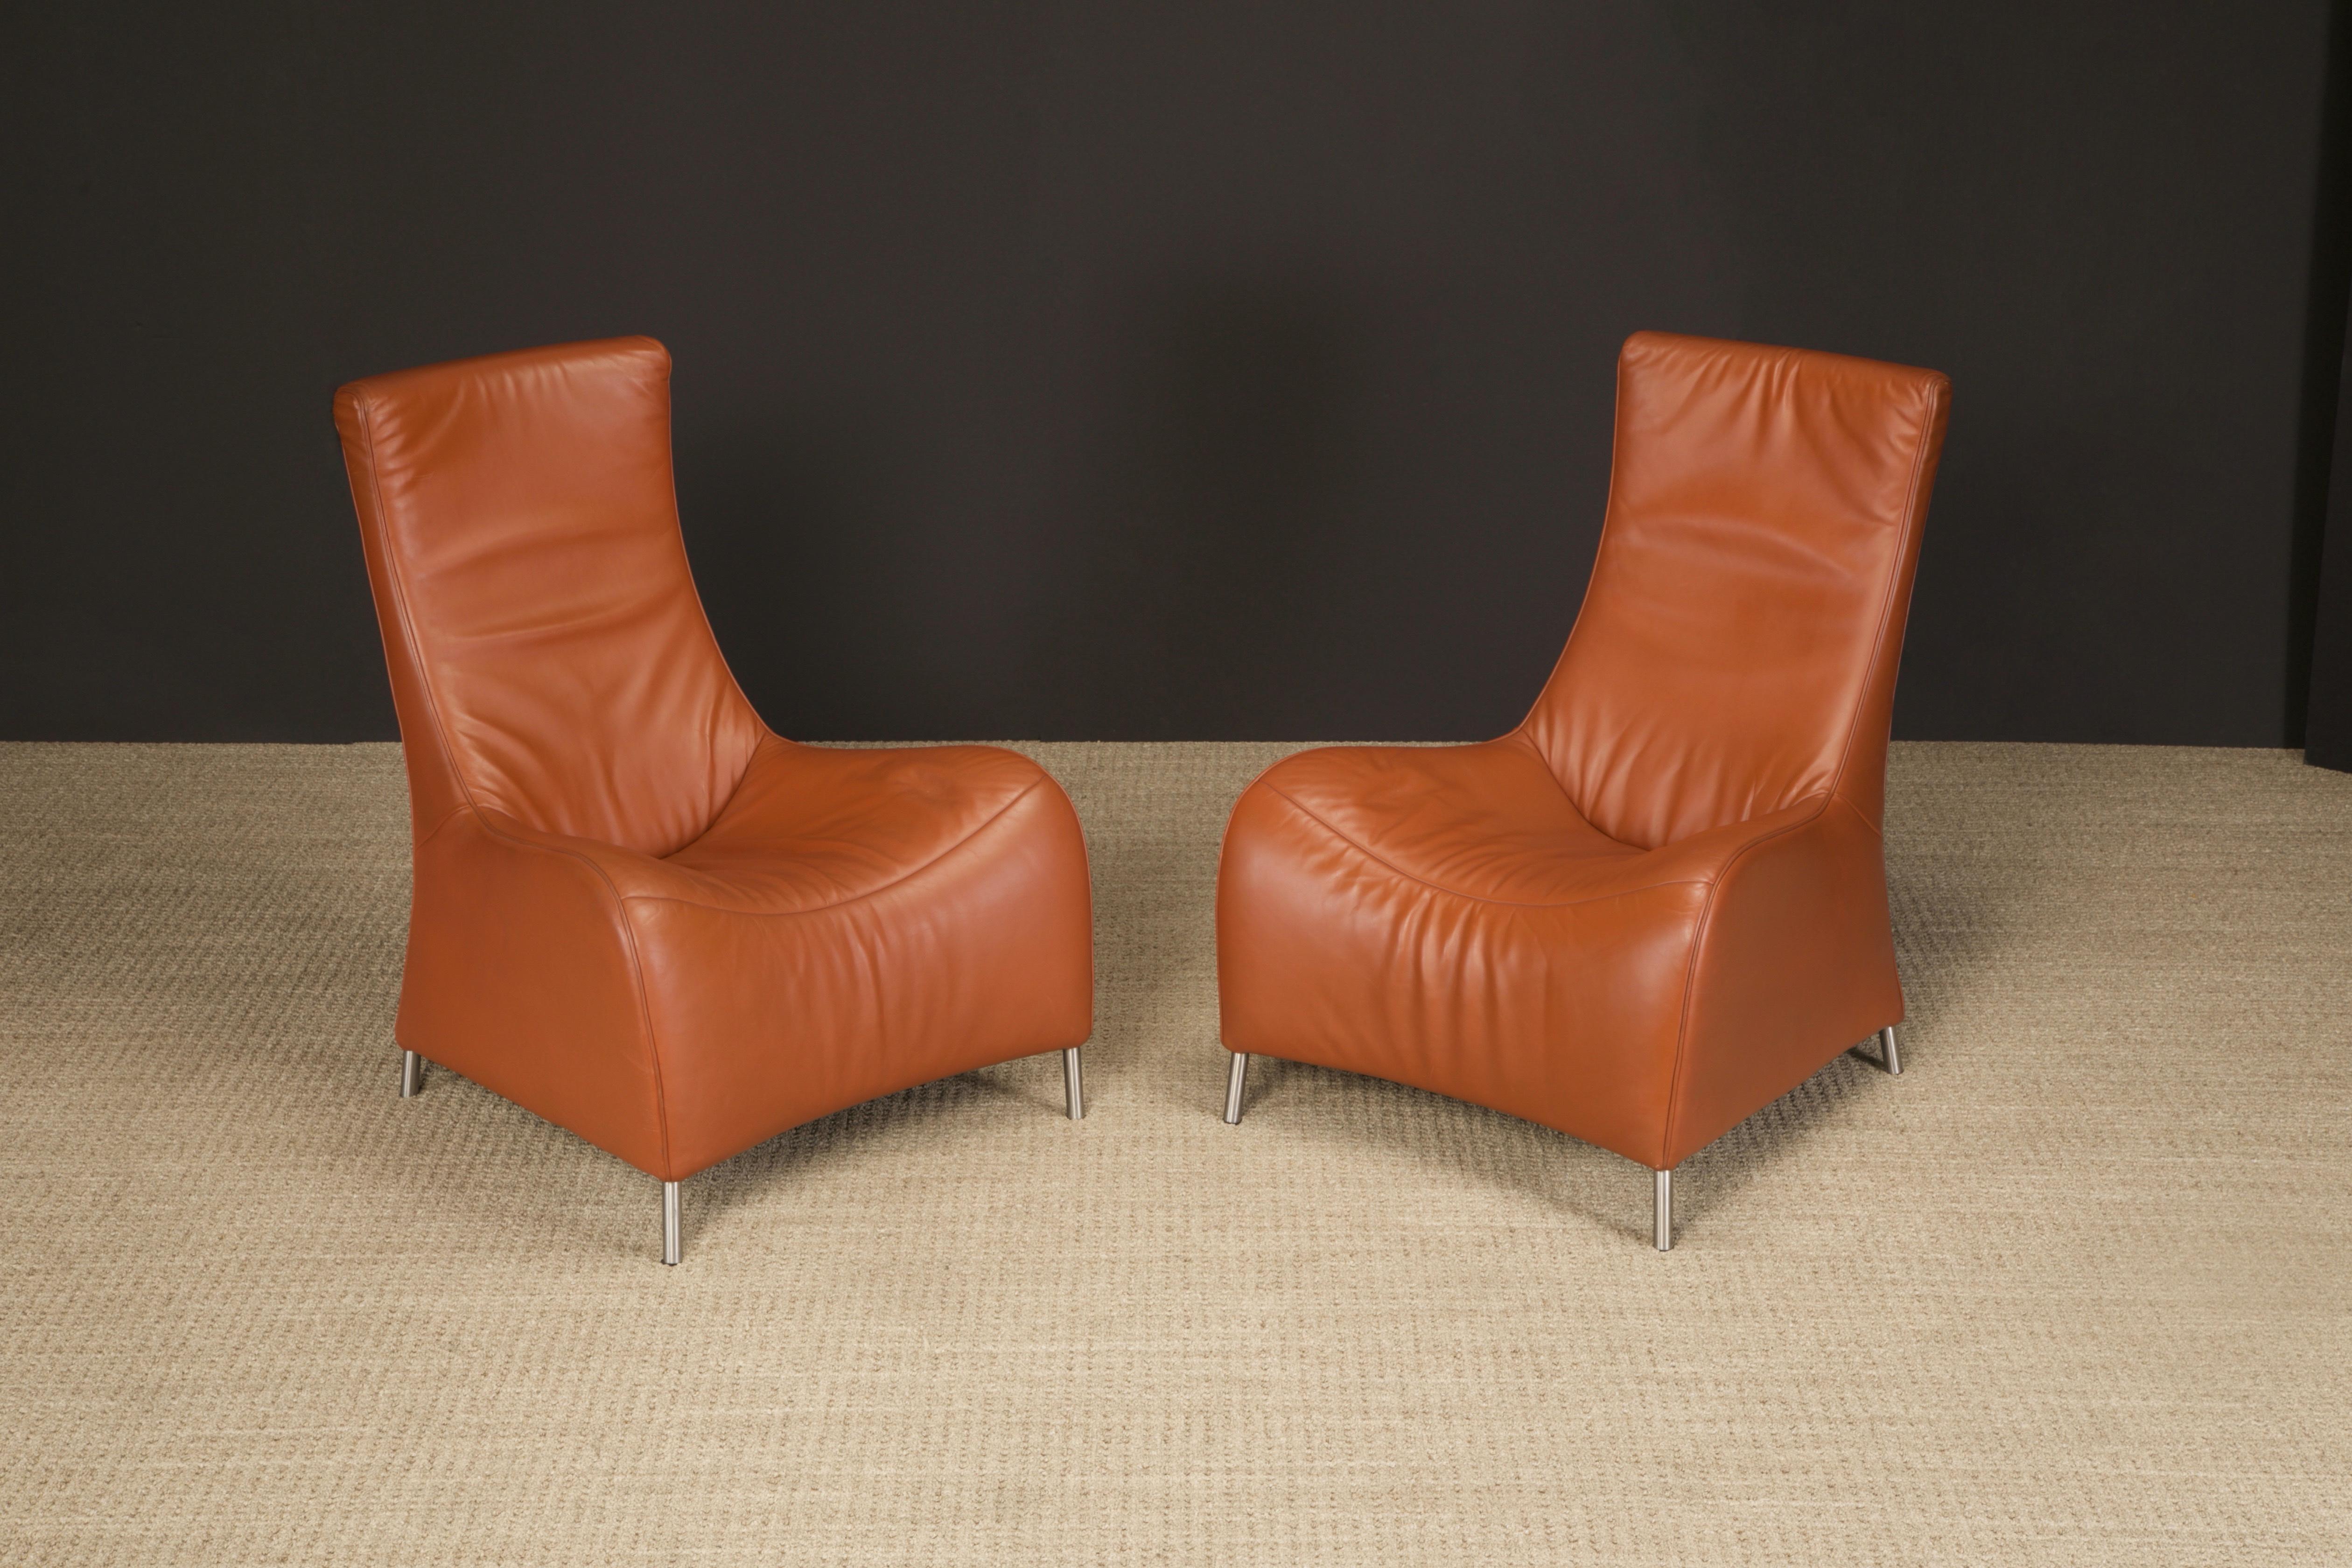 Swiss Cognac Leather Lounge Chairs by Mathias Hoffmann for De Sede, 1980s, Signed For Sale